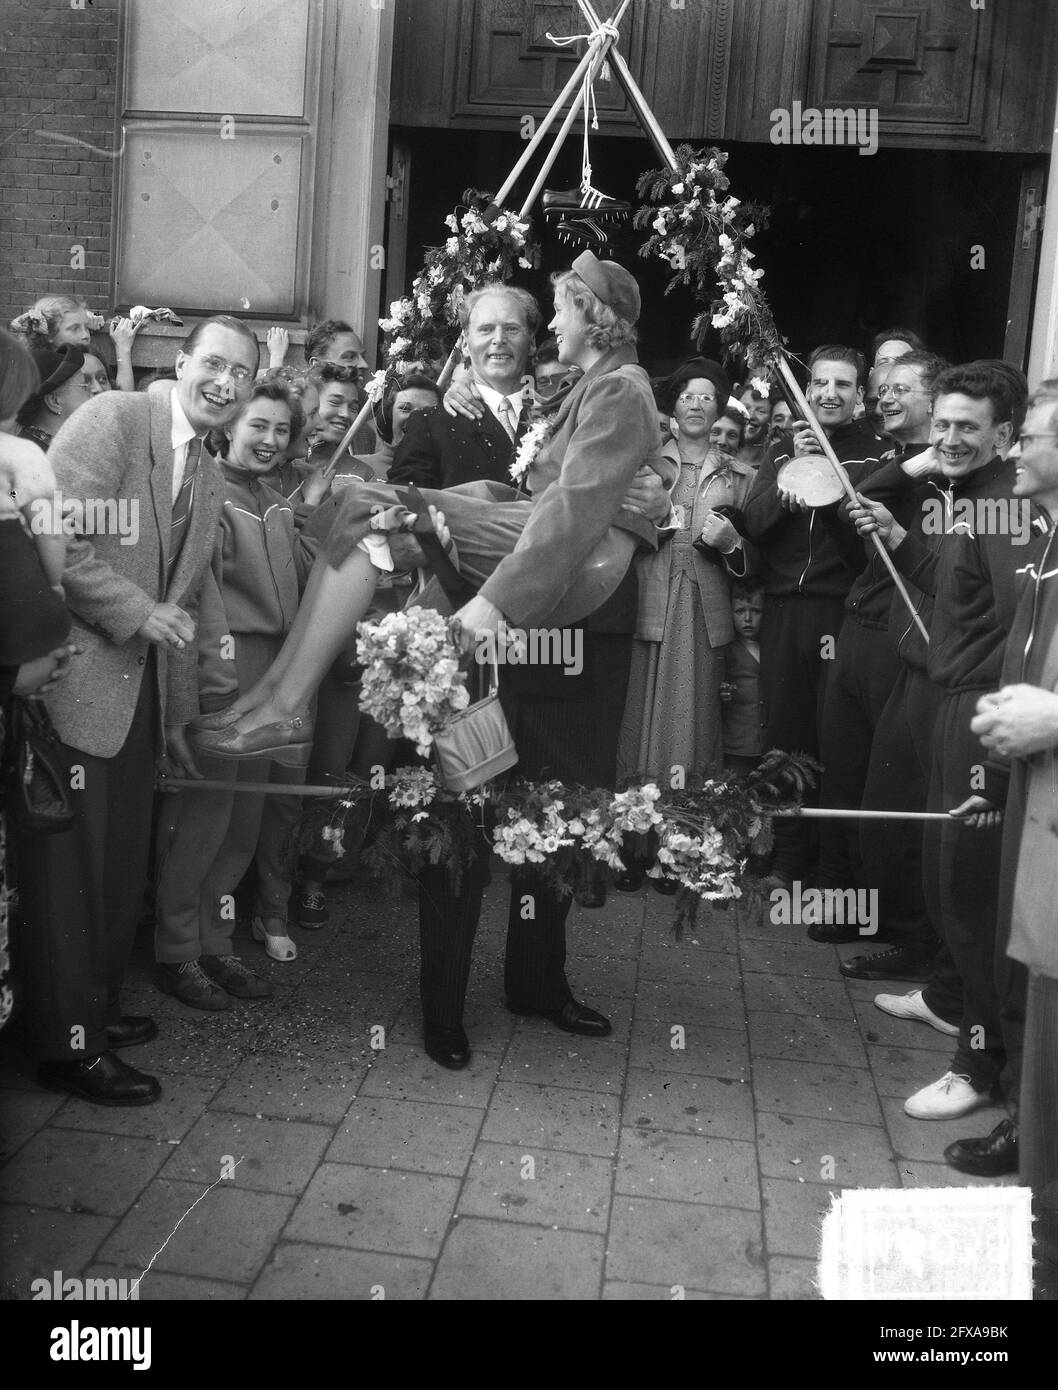 Discus wedding (The Hague) Aad de Bruijn and Welly Pasma, June 6, 1951, athletics, brides, weddings, sports, The Netherlands, 20th century press agency photo, news to remember, documentary, historic photography 1945-1990, visual stories, human history of the Twentieth Century, capturing moments in time Stock Photo